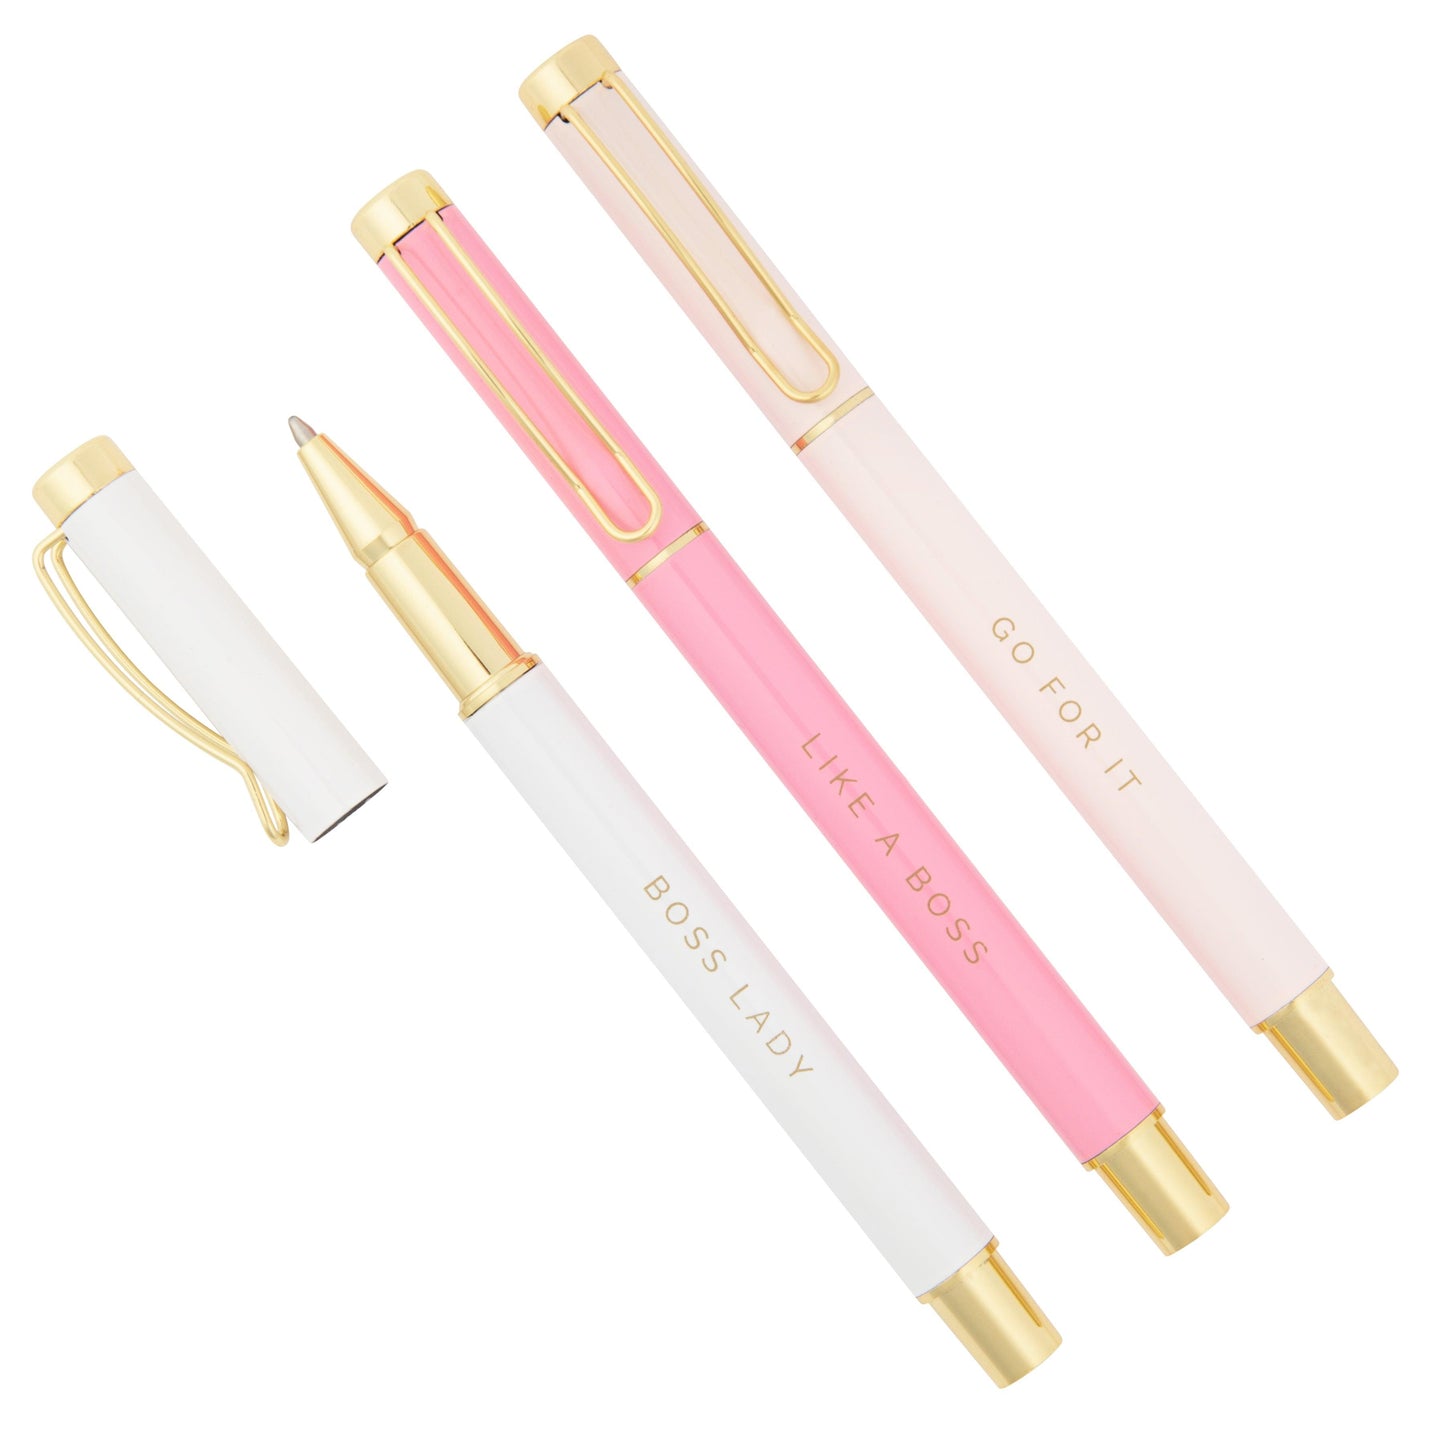 Boss Lady Metal Pen Set - Made for Mama Shop